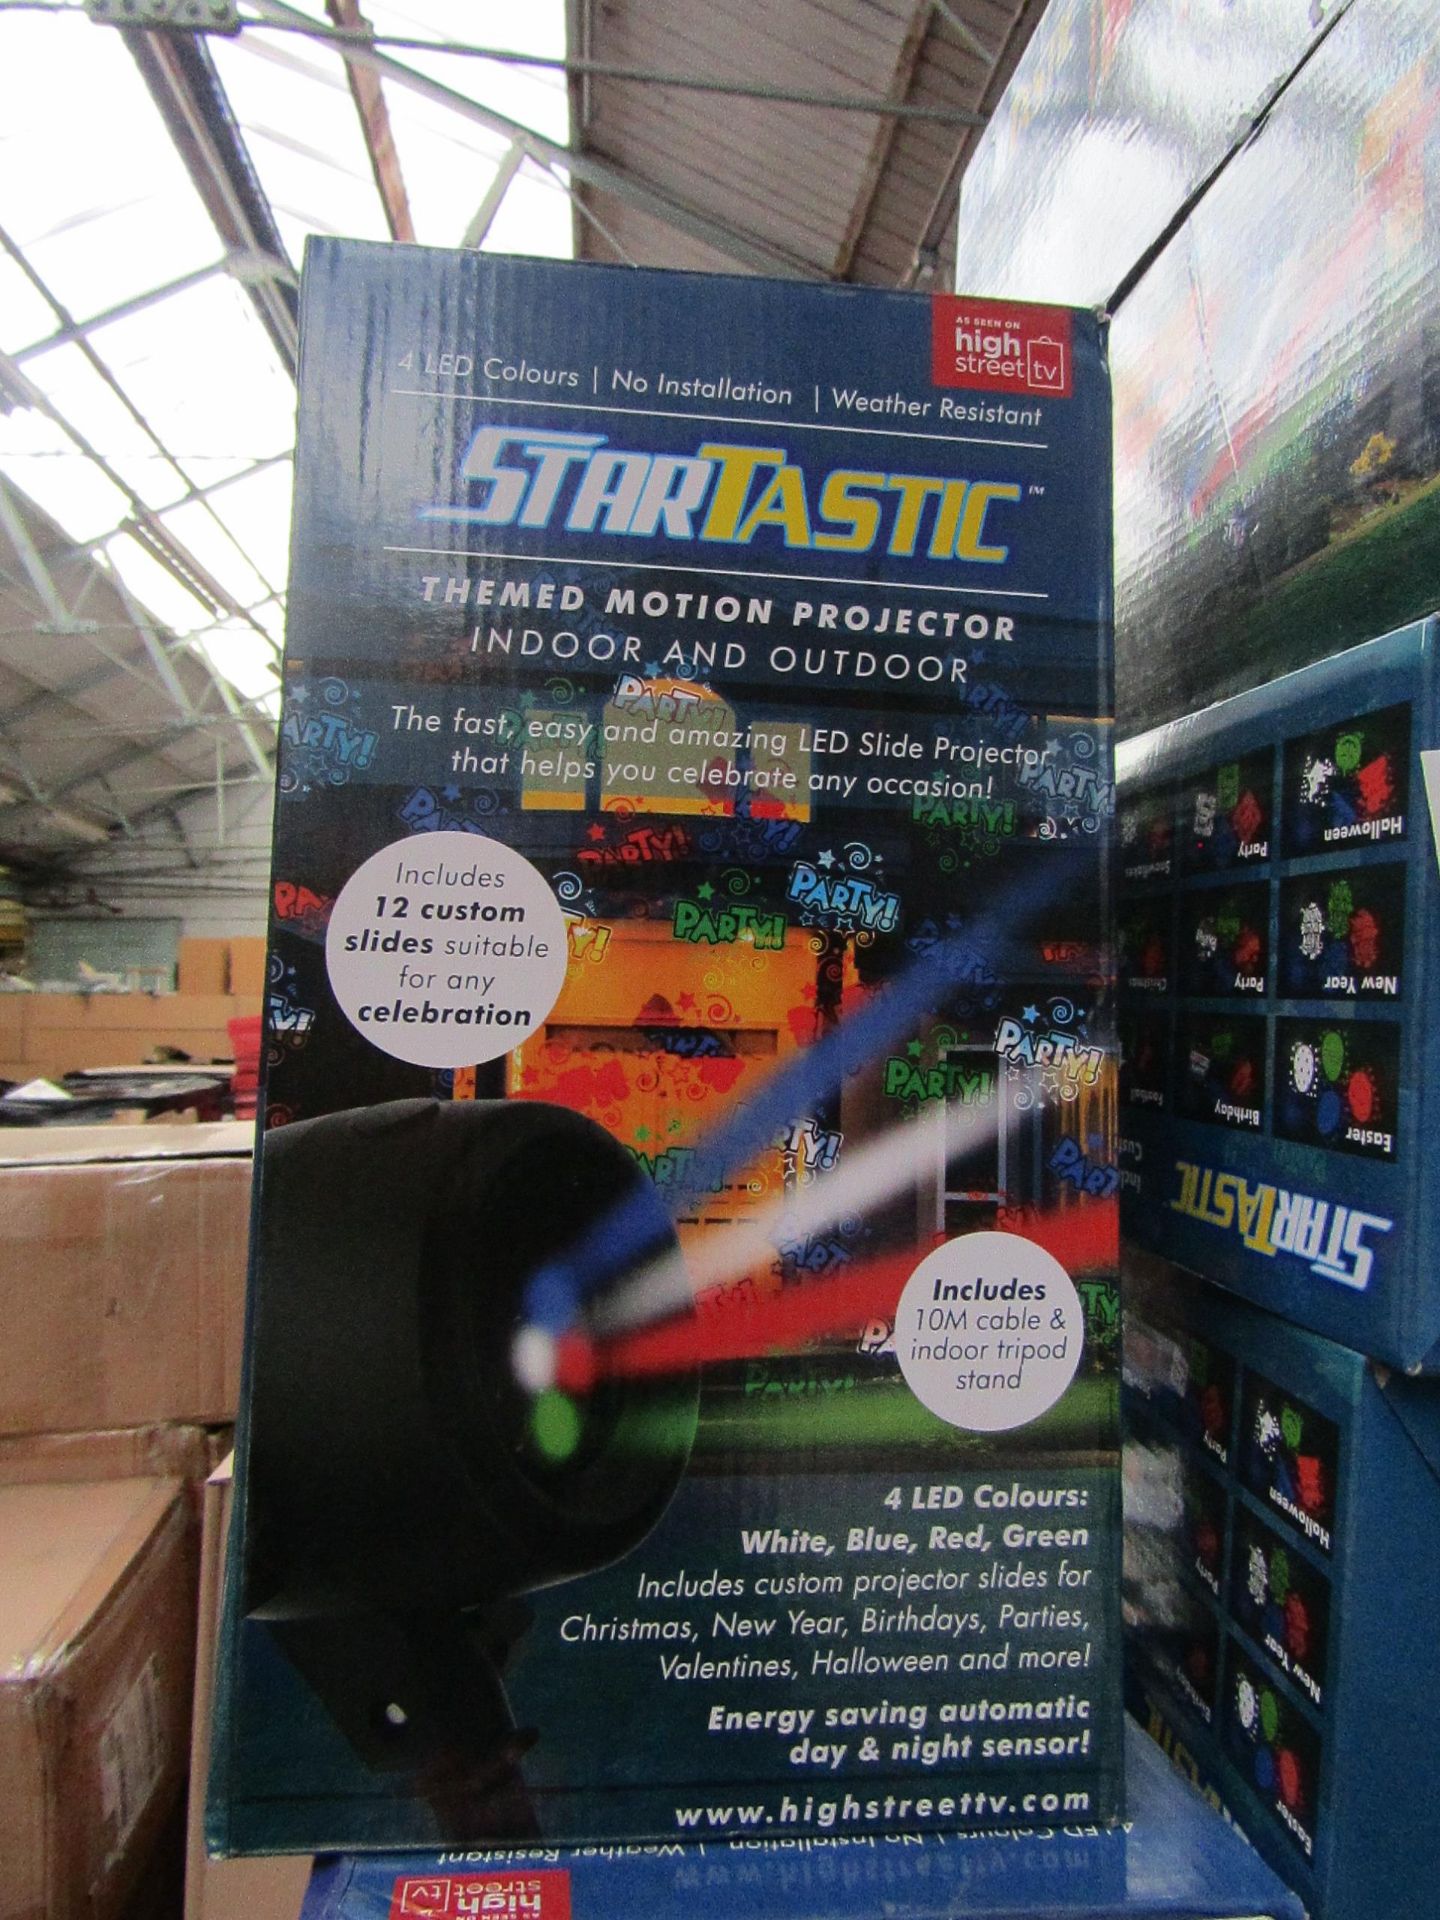 | 3x | STARTASTIC OUTDOOR AND INDOOR THEMED MOTION PROJECTOR | UNCHECKED AND BOXED | NO ONLINE RE-